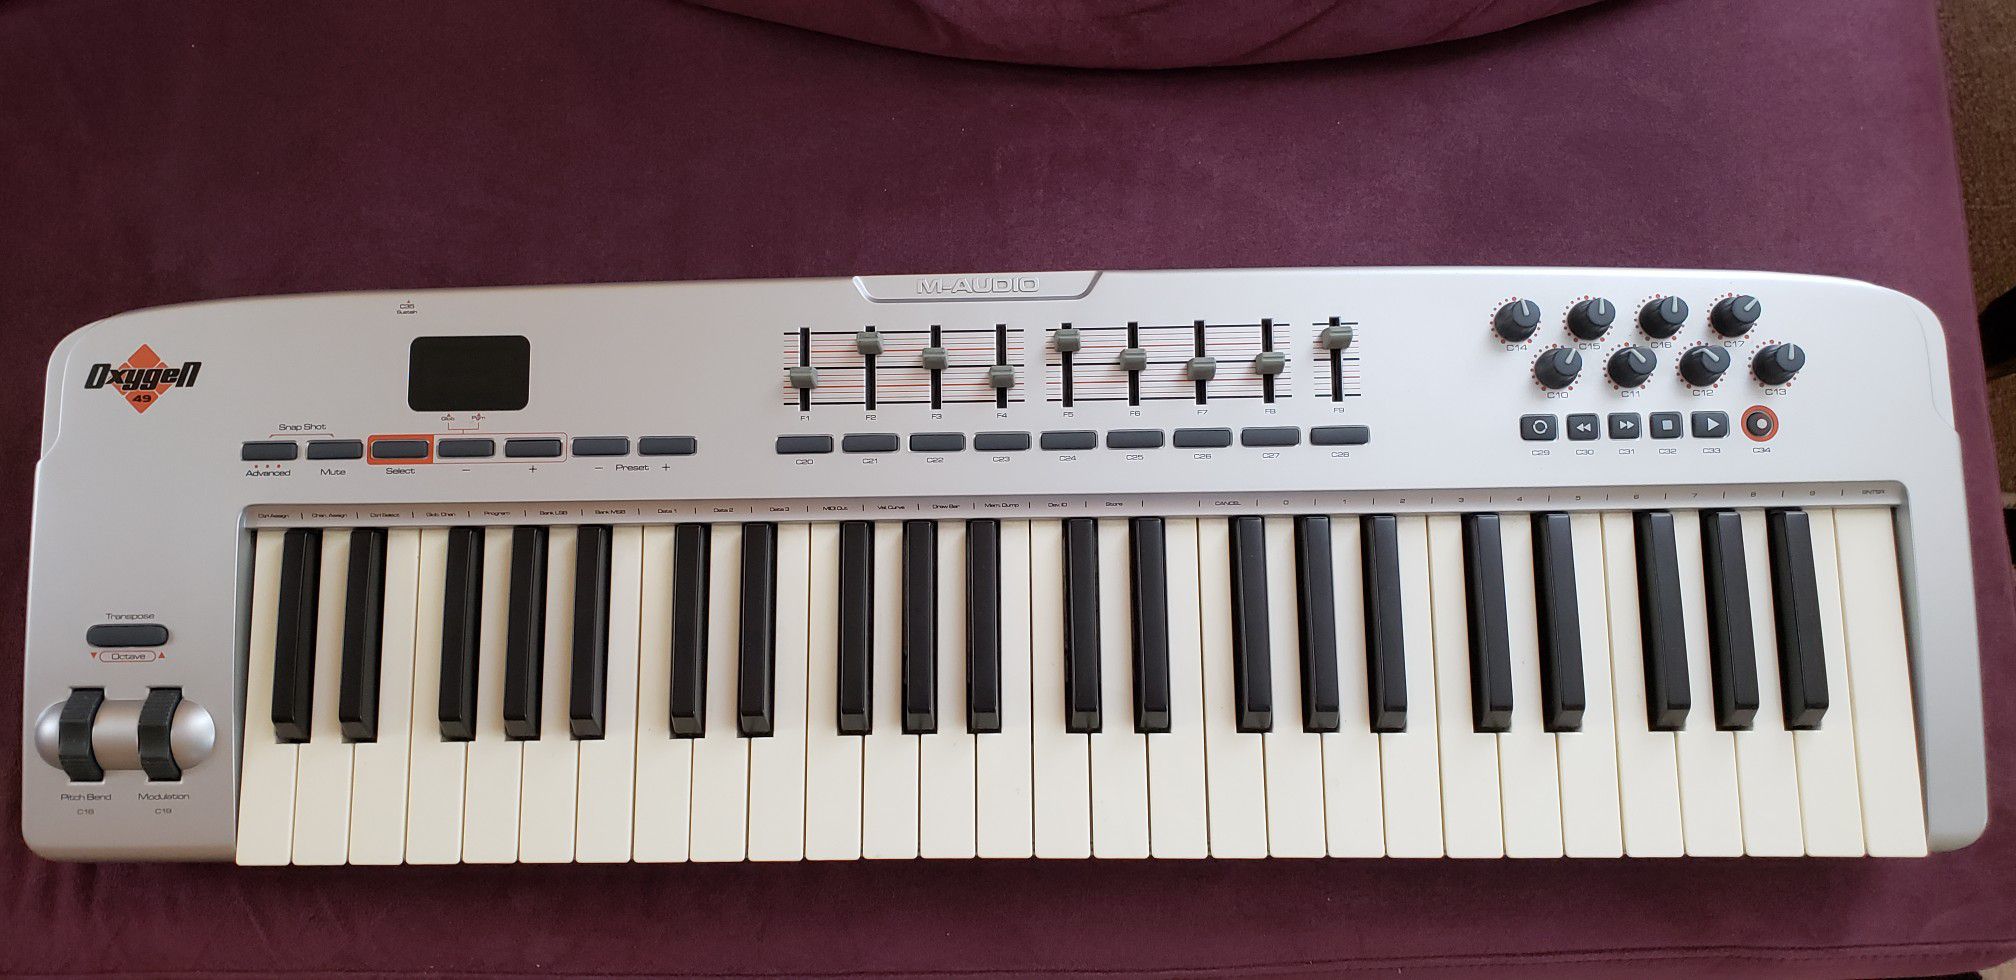 M-audio oxygen 49 midi keyboard, like new, for sale or trade, $125 or best offer. Brooklyn